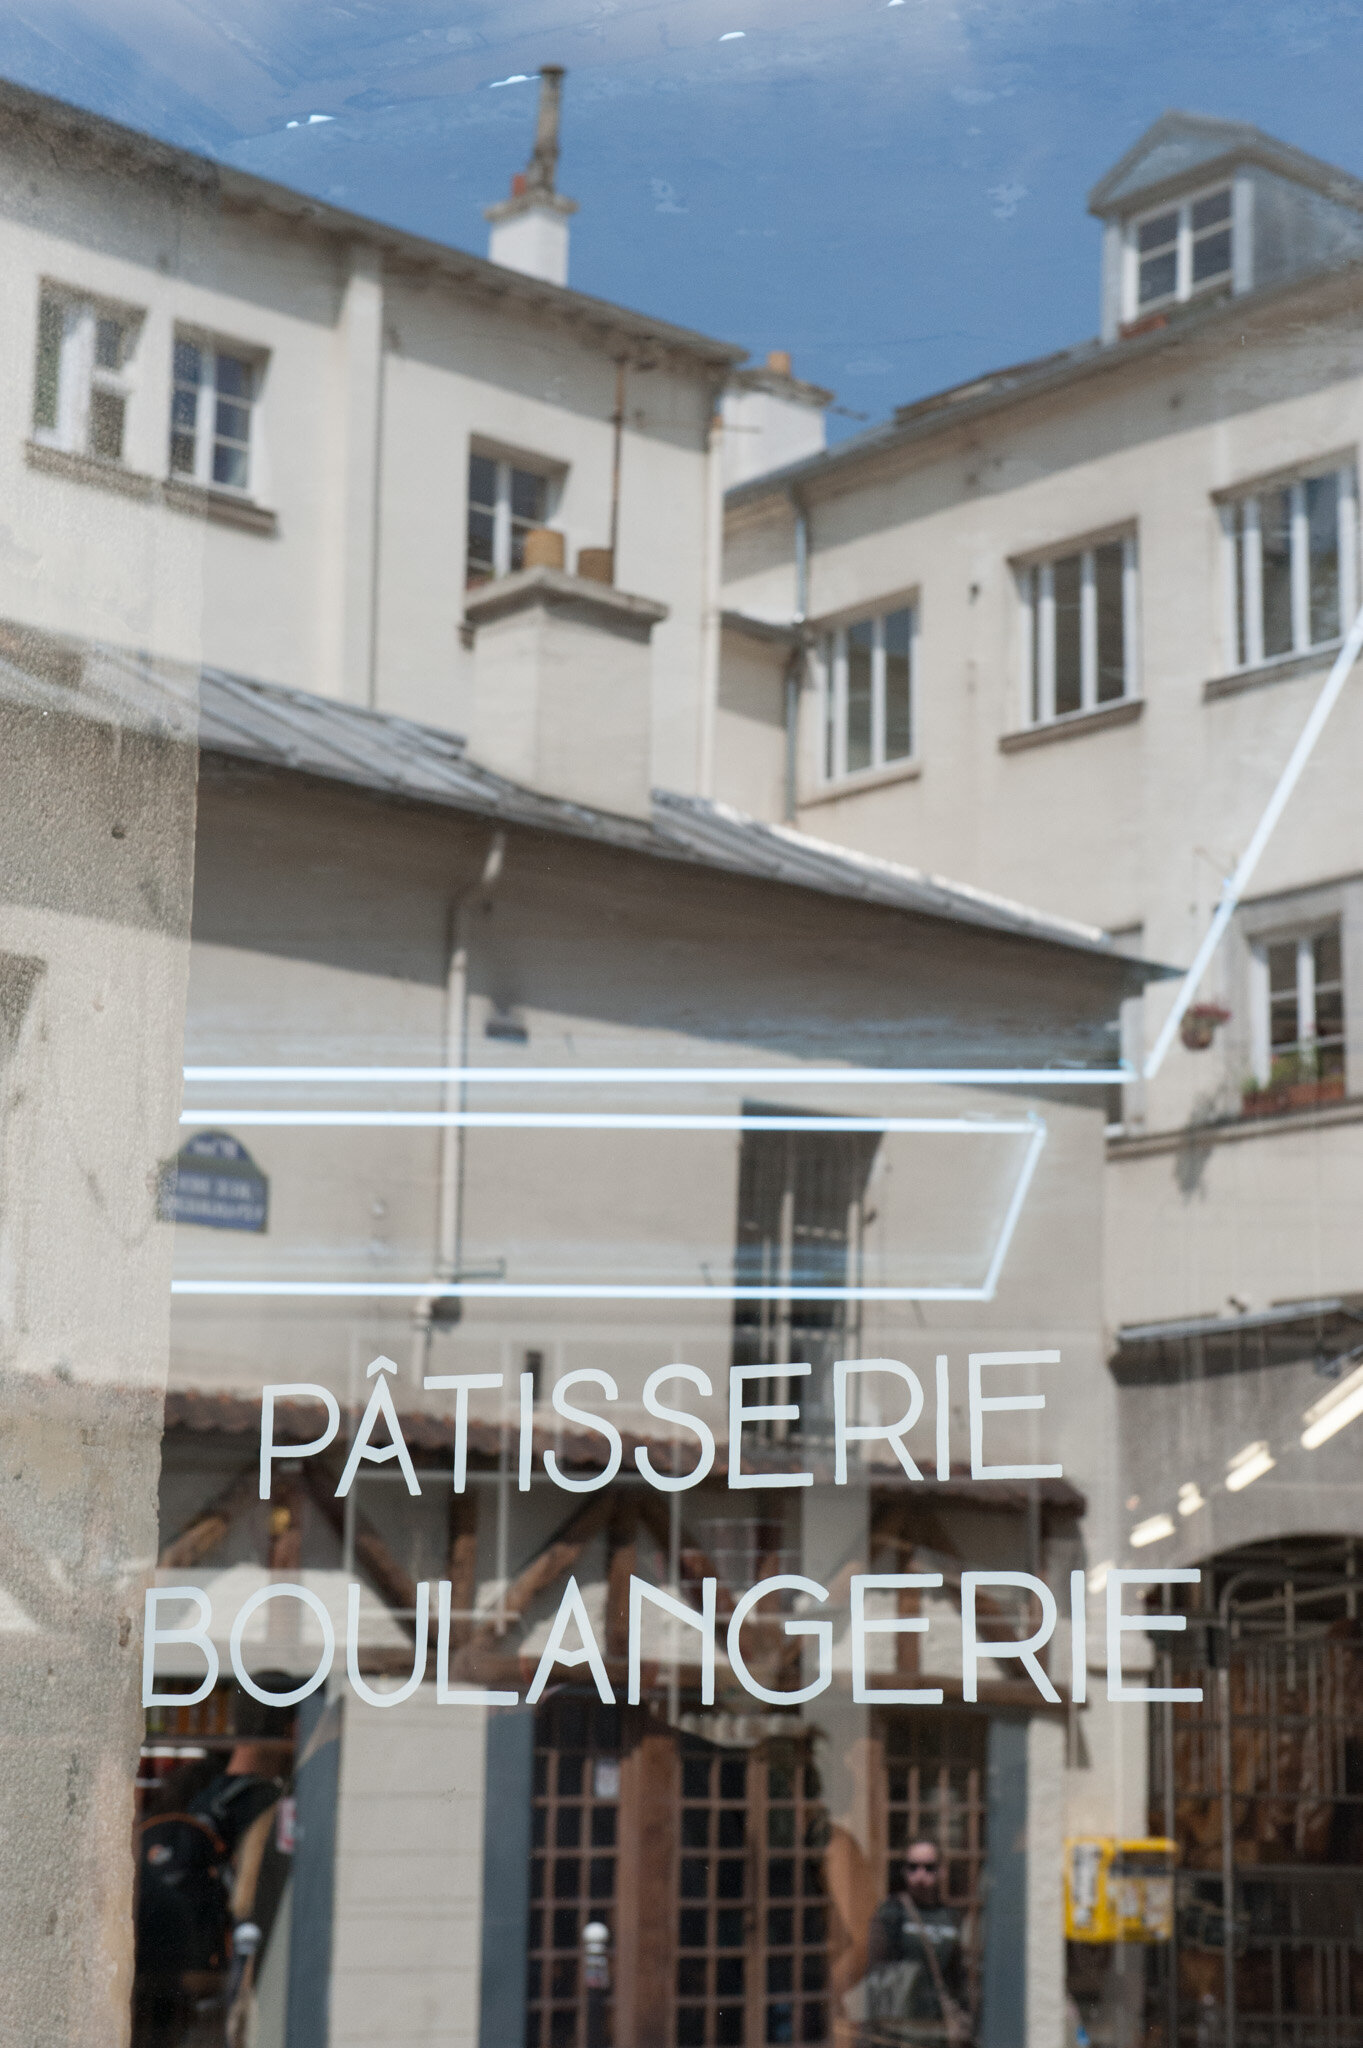    'Canal St. Martin' for National Geographic Traveler    Reflection in window of the boulangerie/pattiserie ‘Liberté’ 